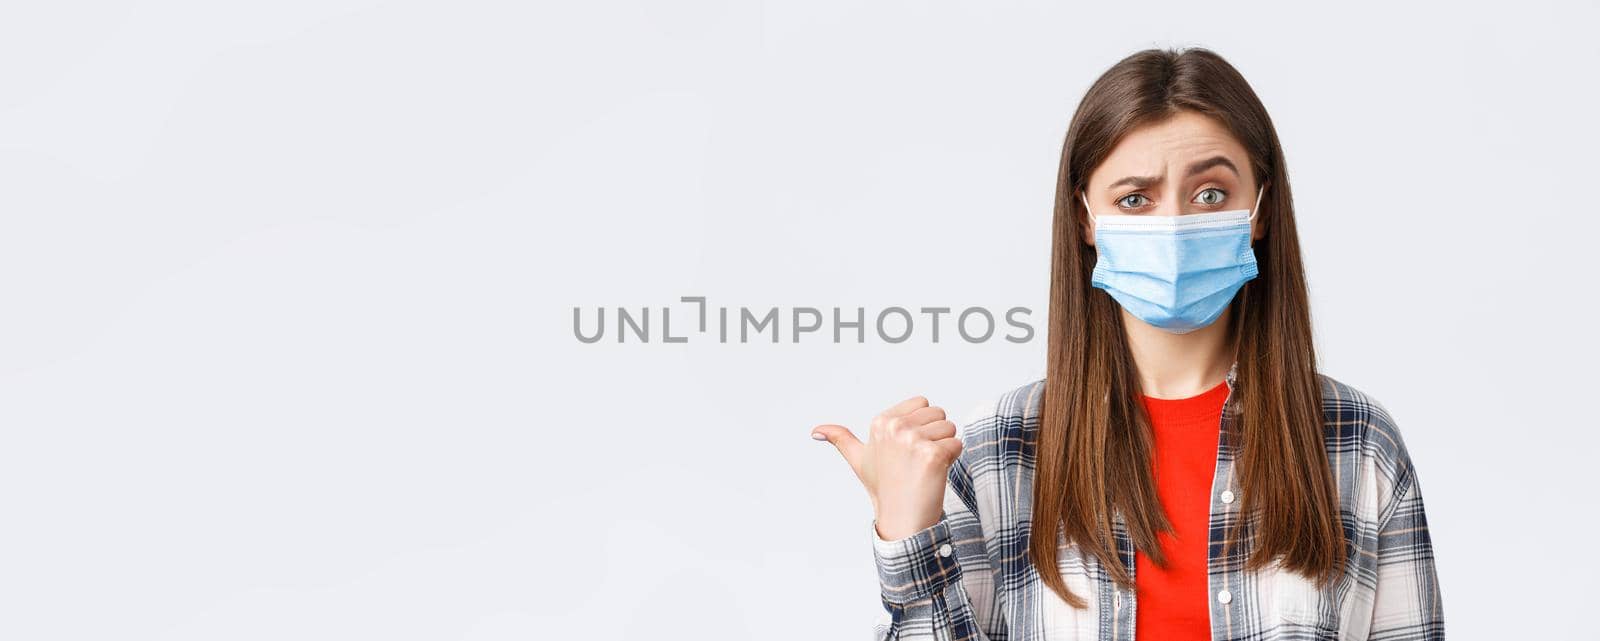 Coronavirus outbreak, leisure on quarantine, social distancing and emotions concept. Skeptical young woman in medical mask express disbelief towards banner to the left, pointing doubtful.